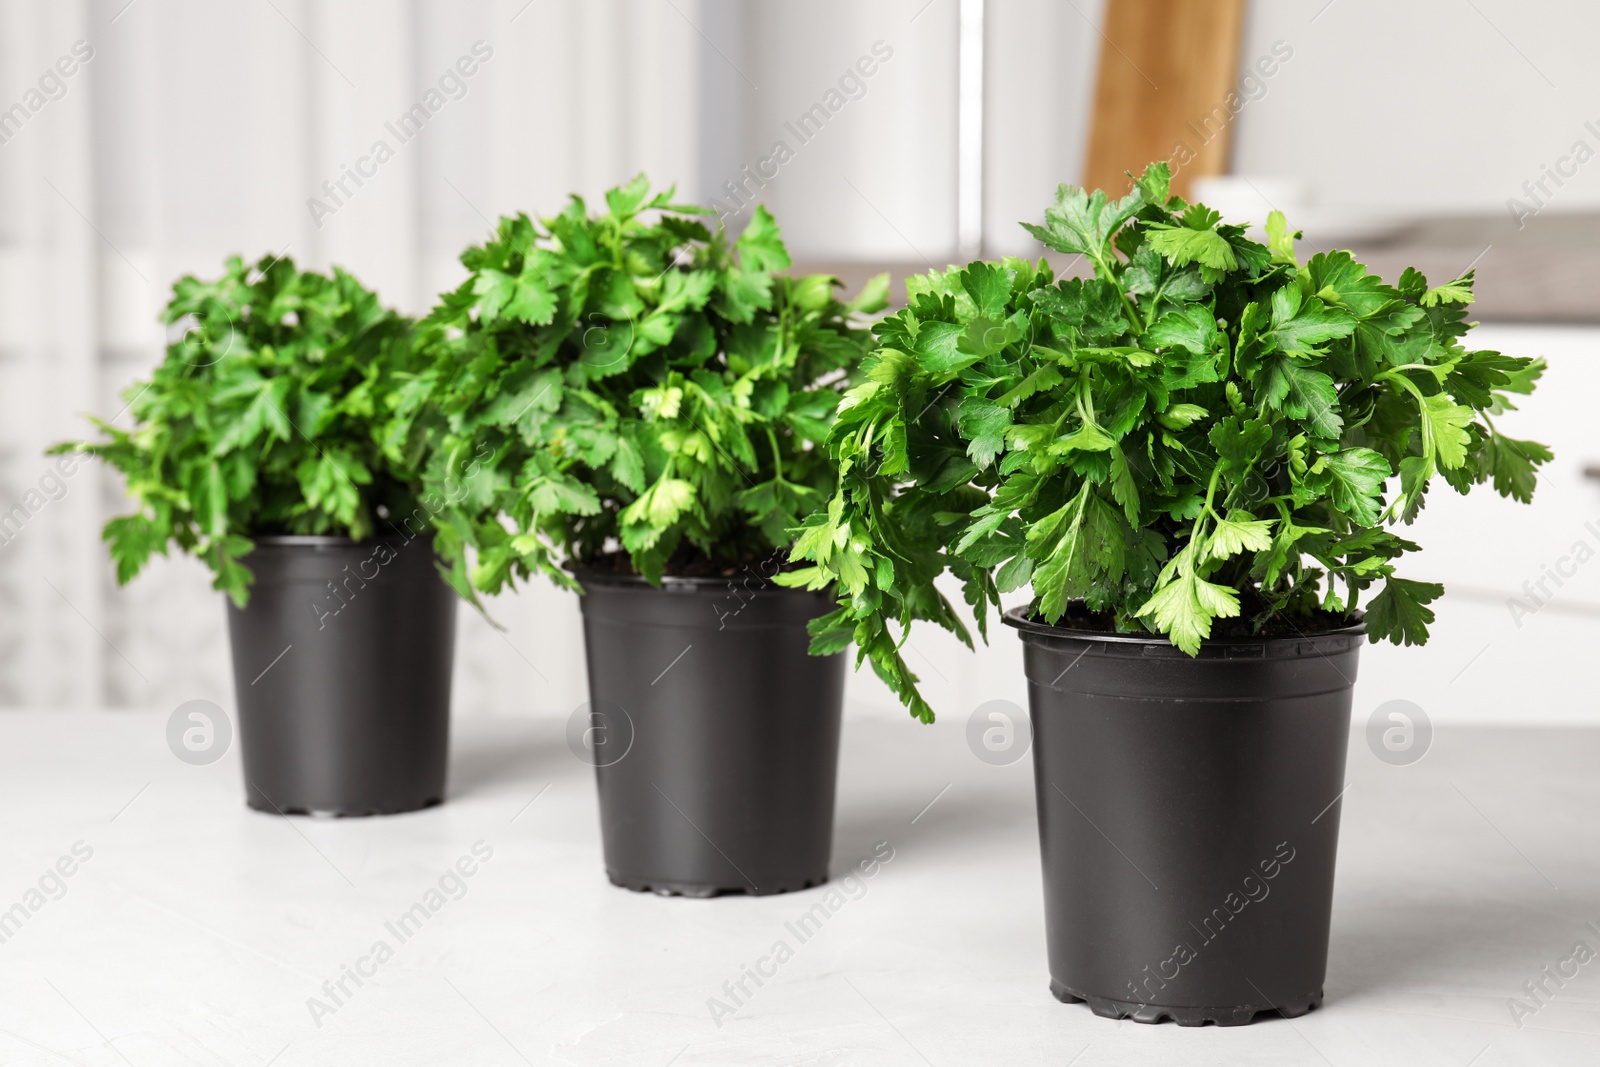 Photo of Pots with fresh green parsley on table in kitchen